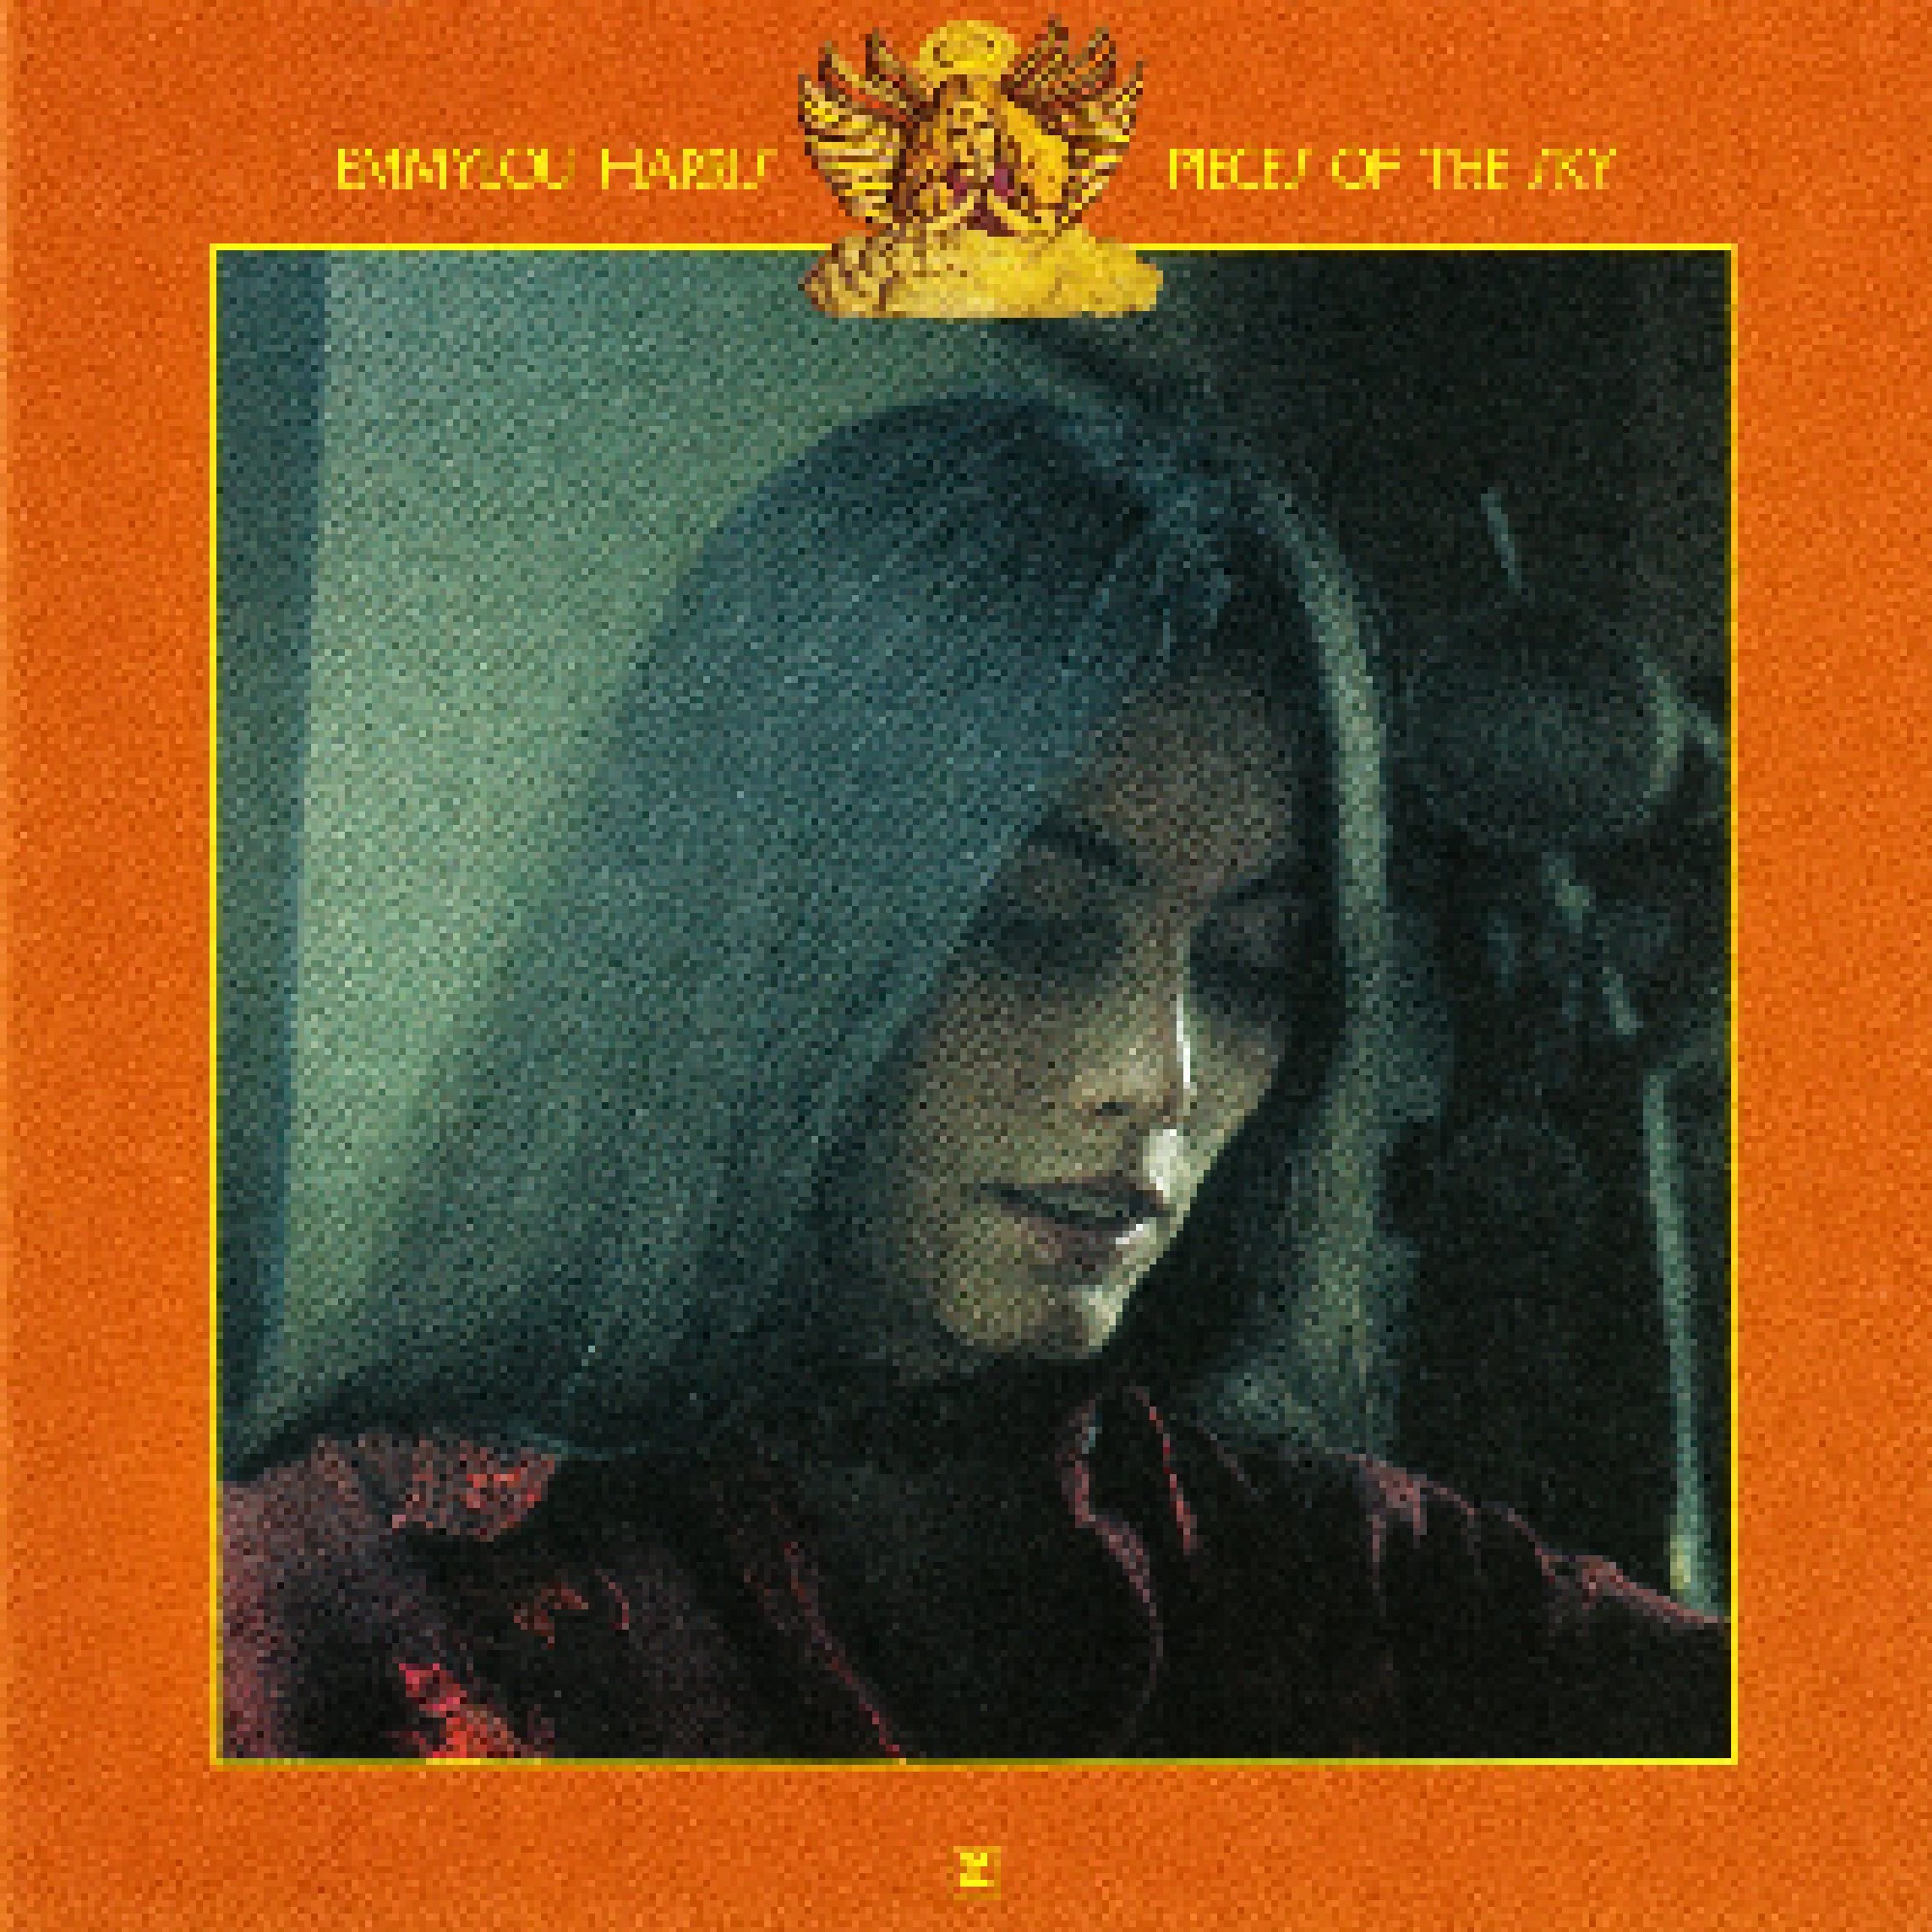 Pieces Of The Sky | CD (2004, Re-Release, Remastered) von Emmylou Harris